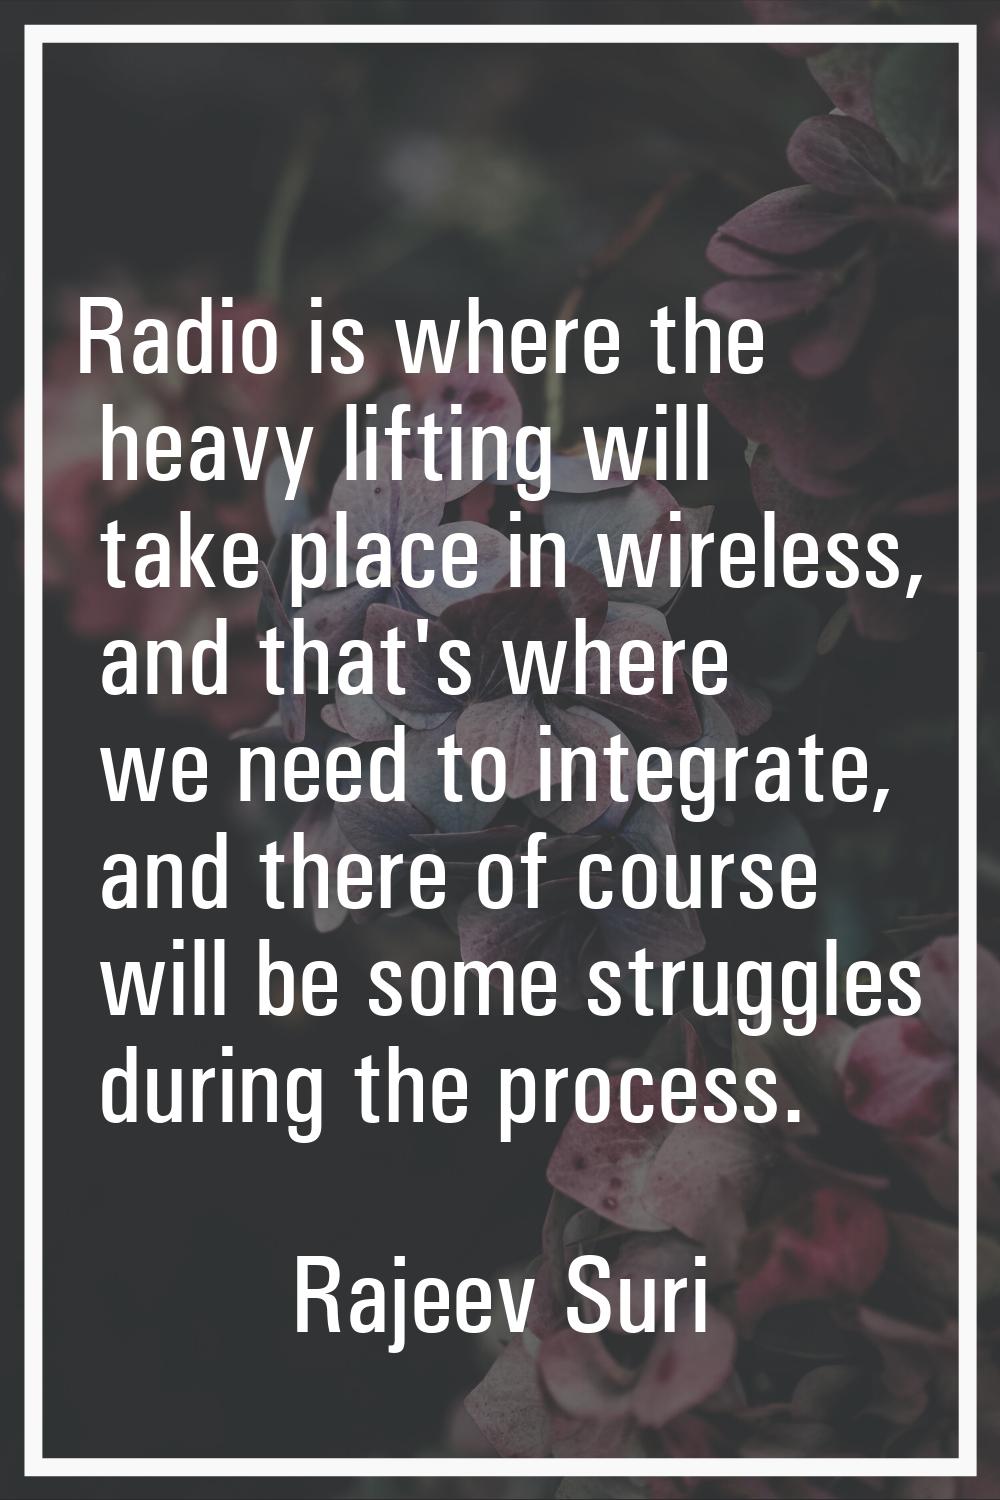 Radio is where the heavy lifting will take place in wireless, and that's where we need to integrate